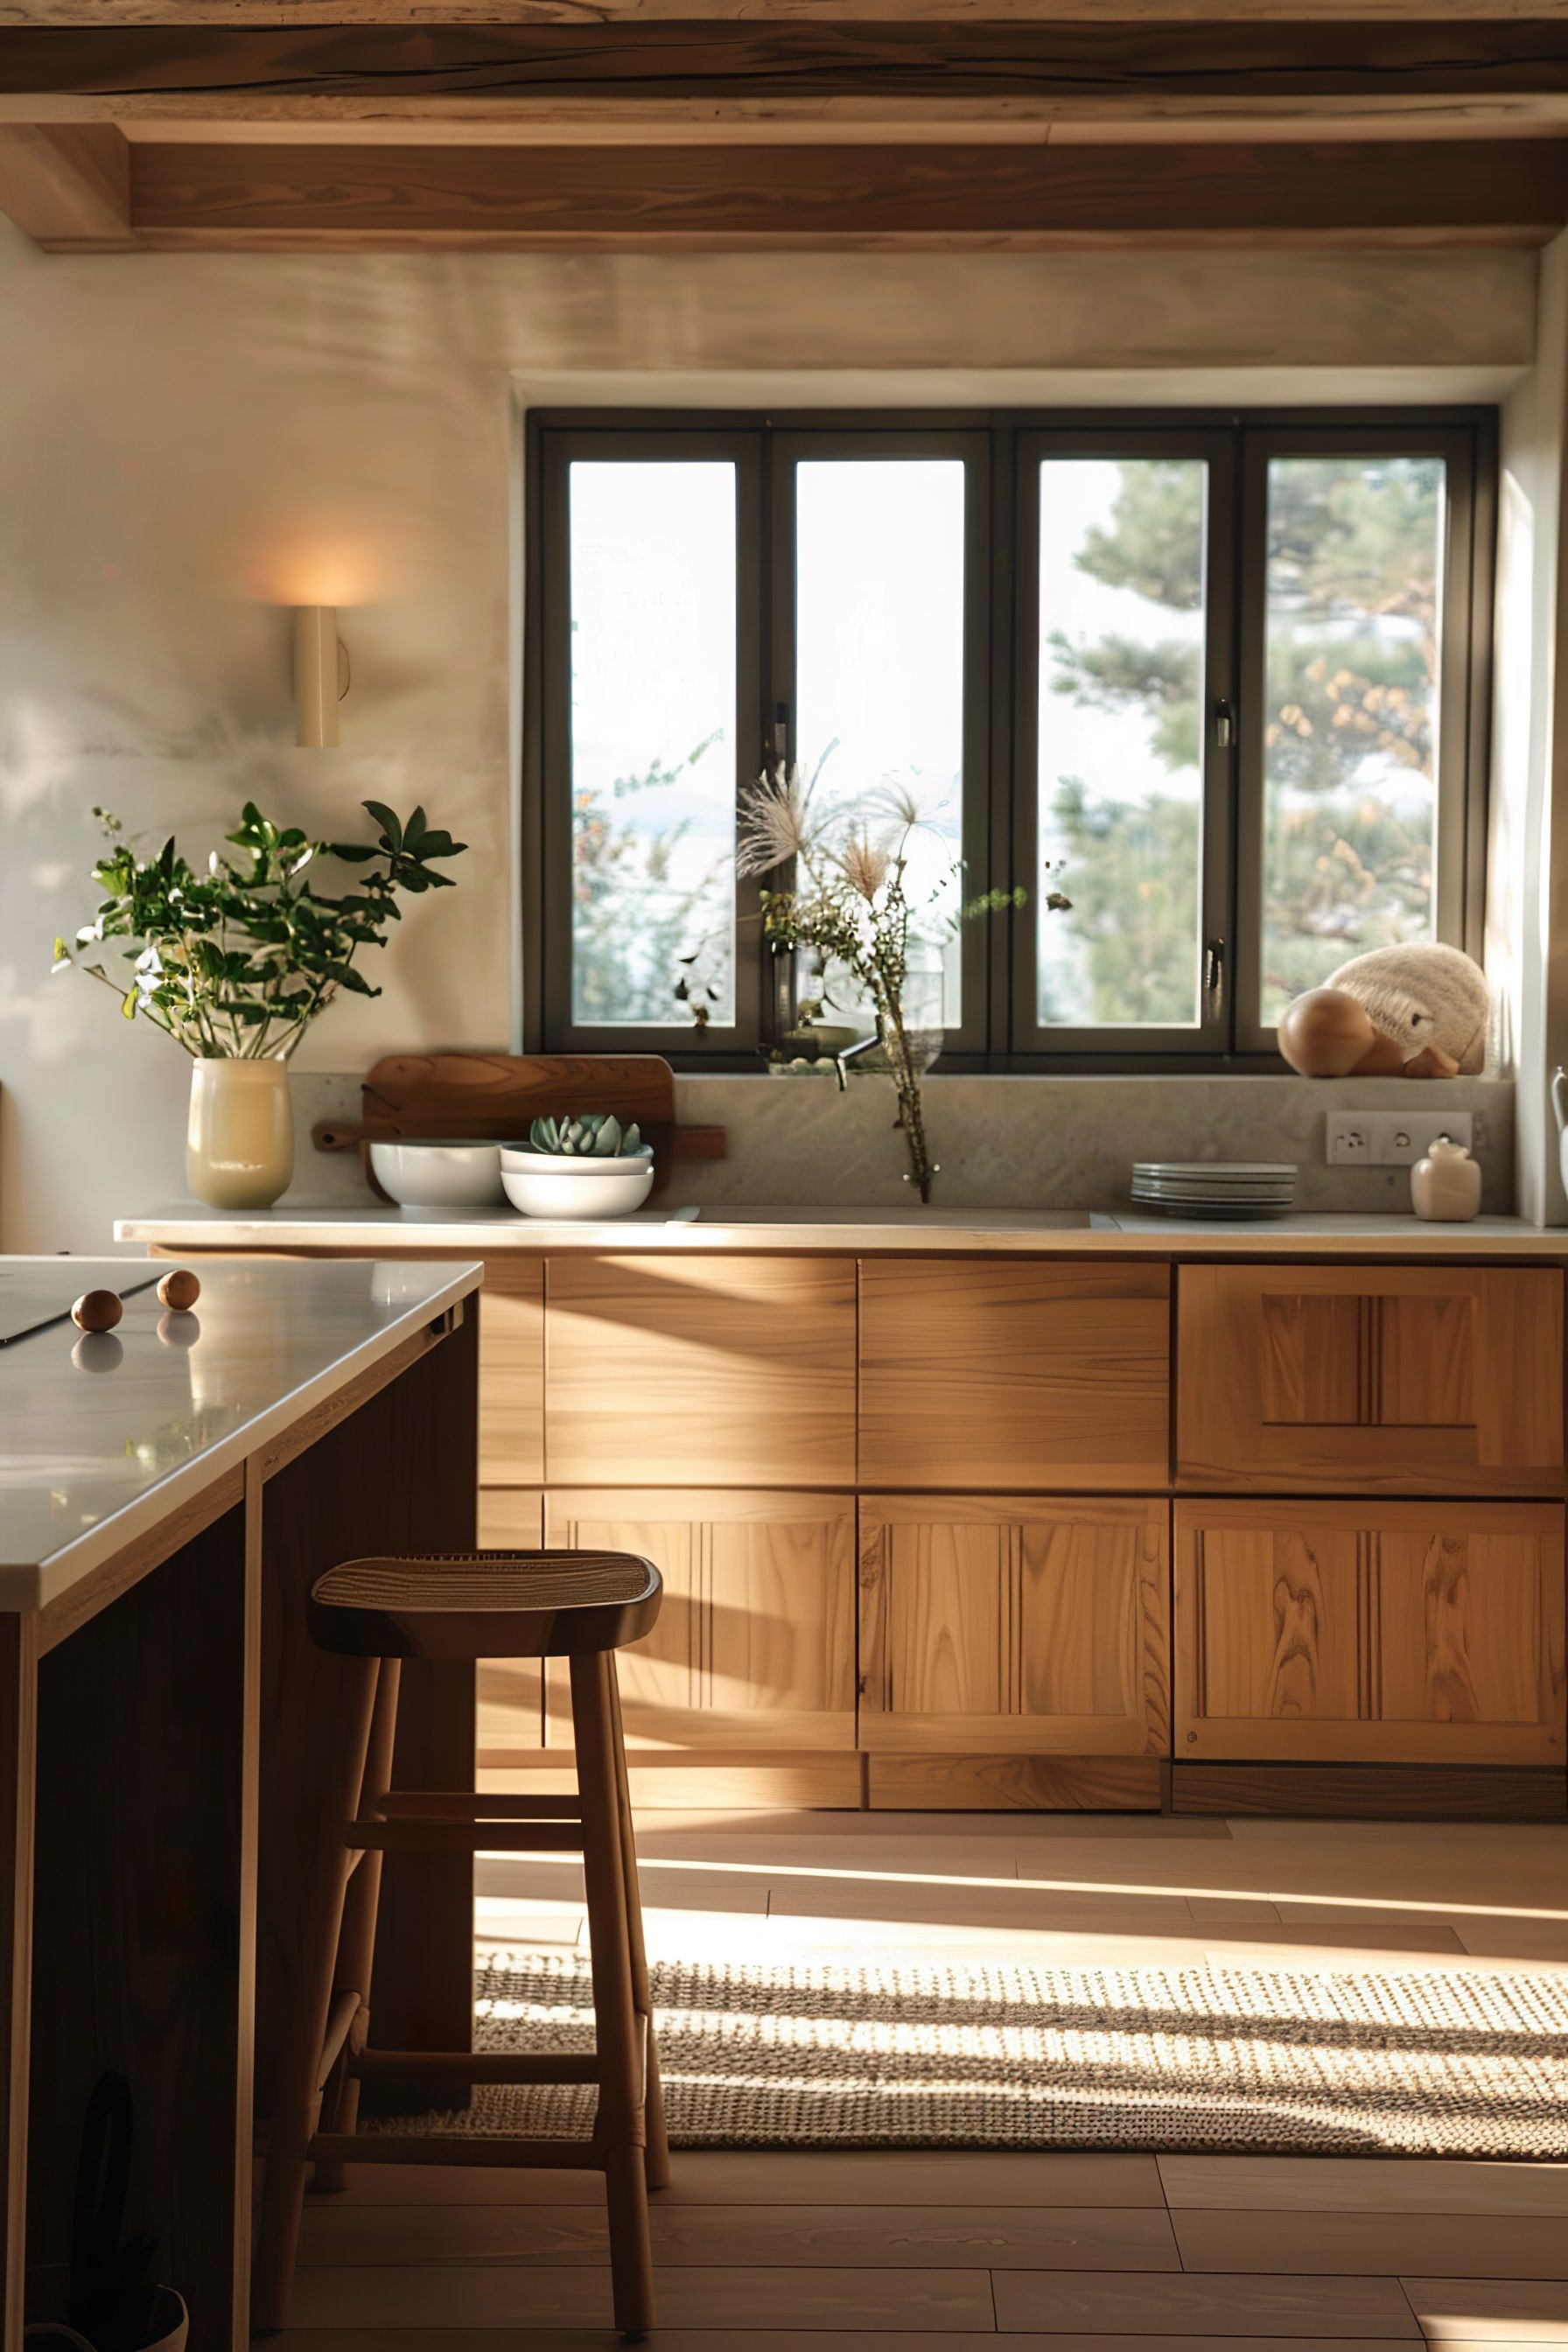 A cozy kitchen interior with warm lighting, wooden cabinetry, a counter with plants, and a view through the window.